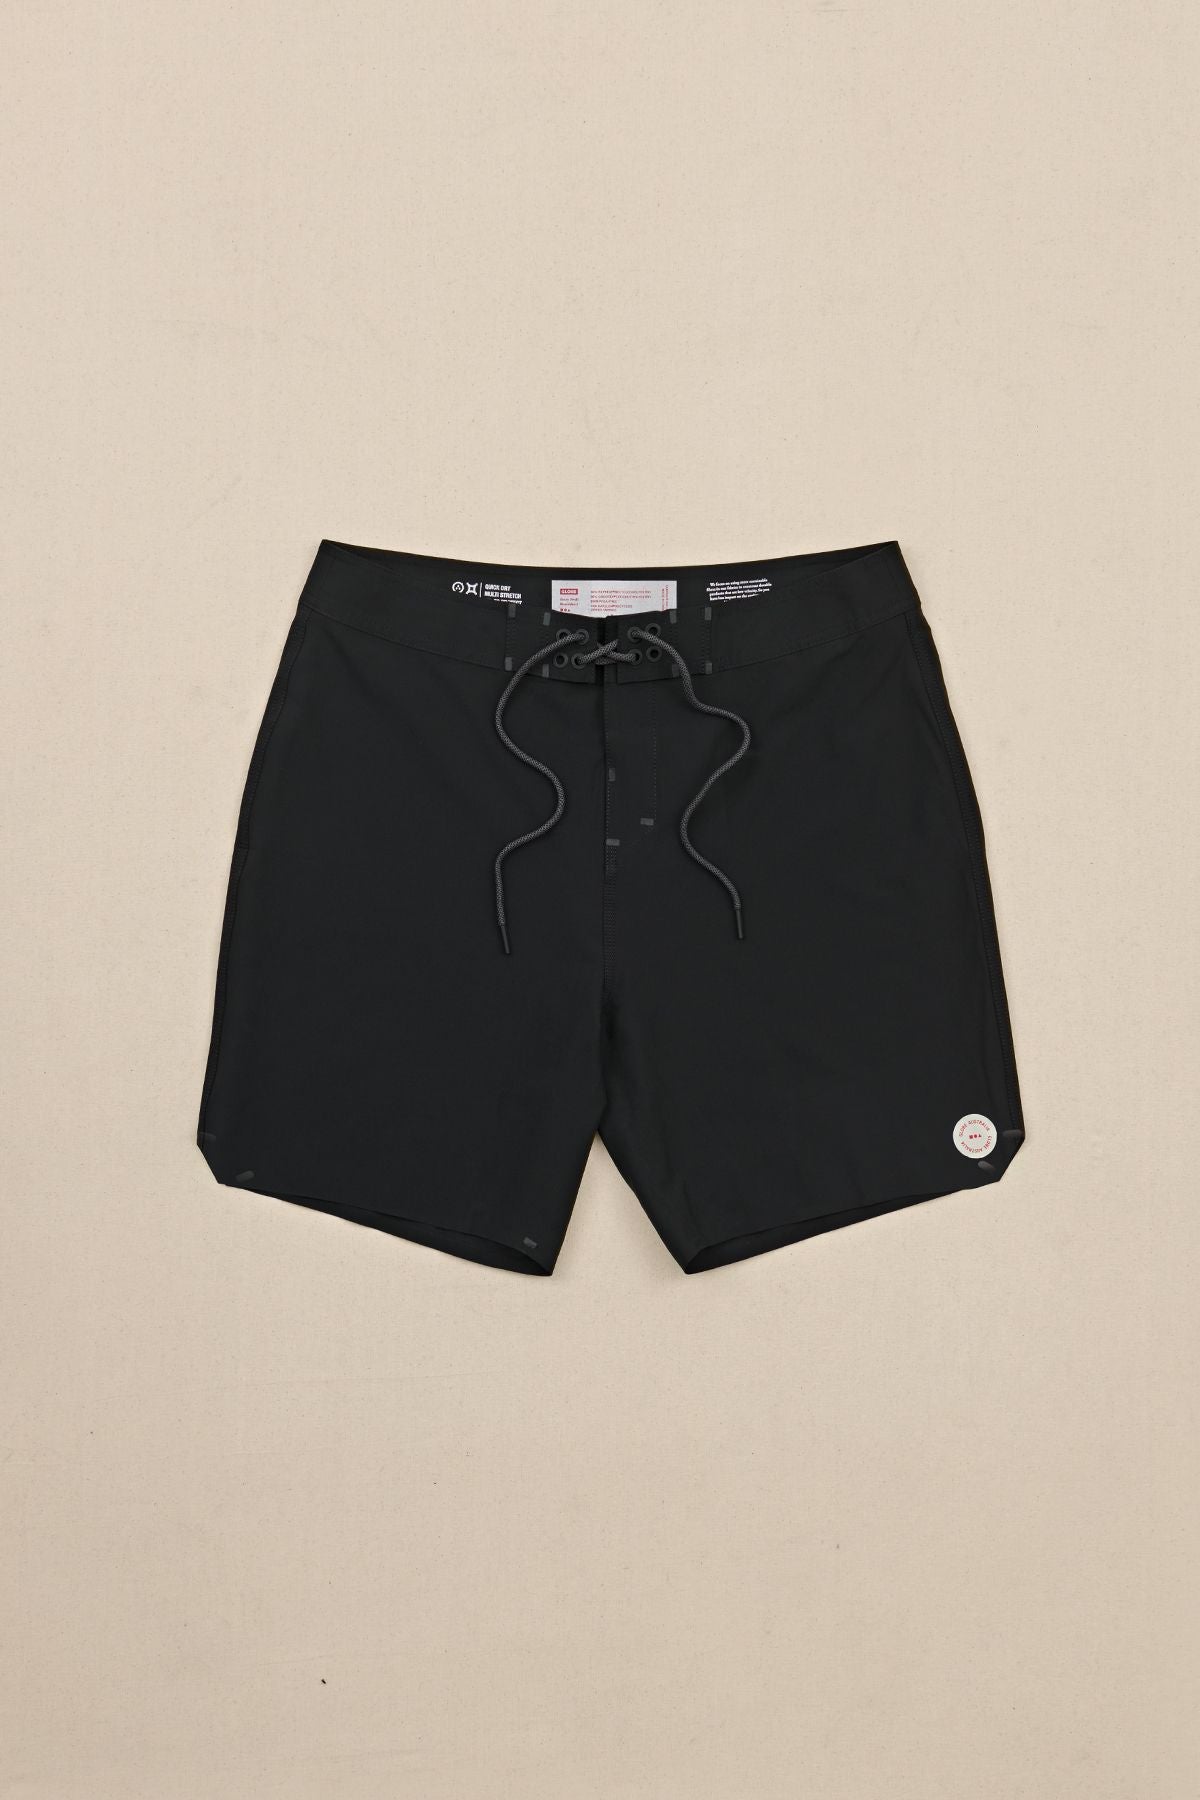 Shop Every Swell Boardshort